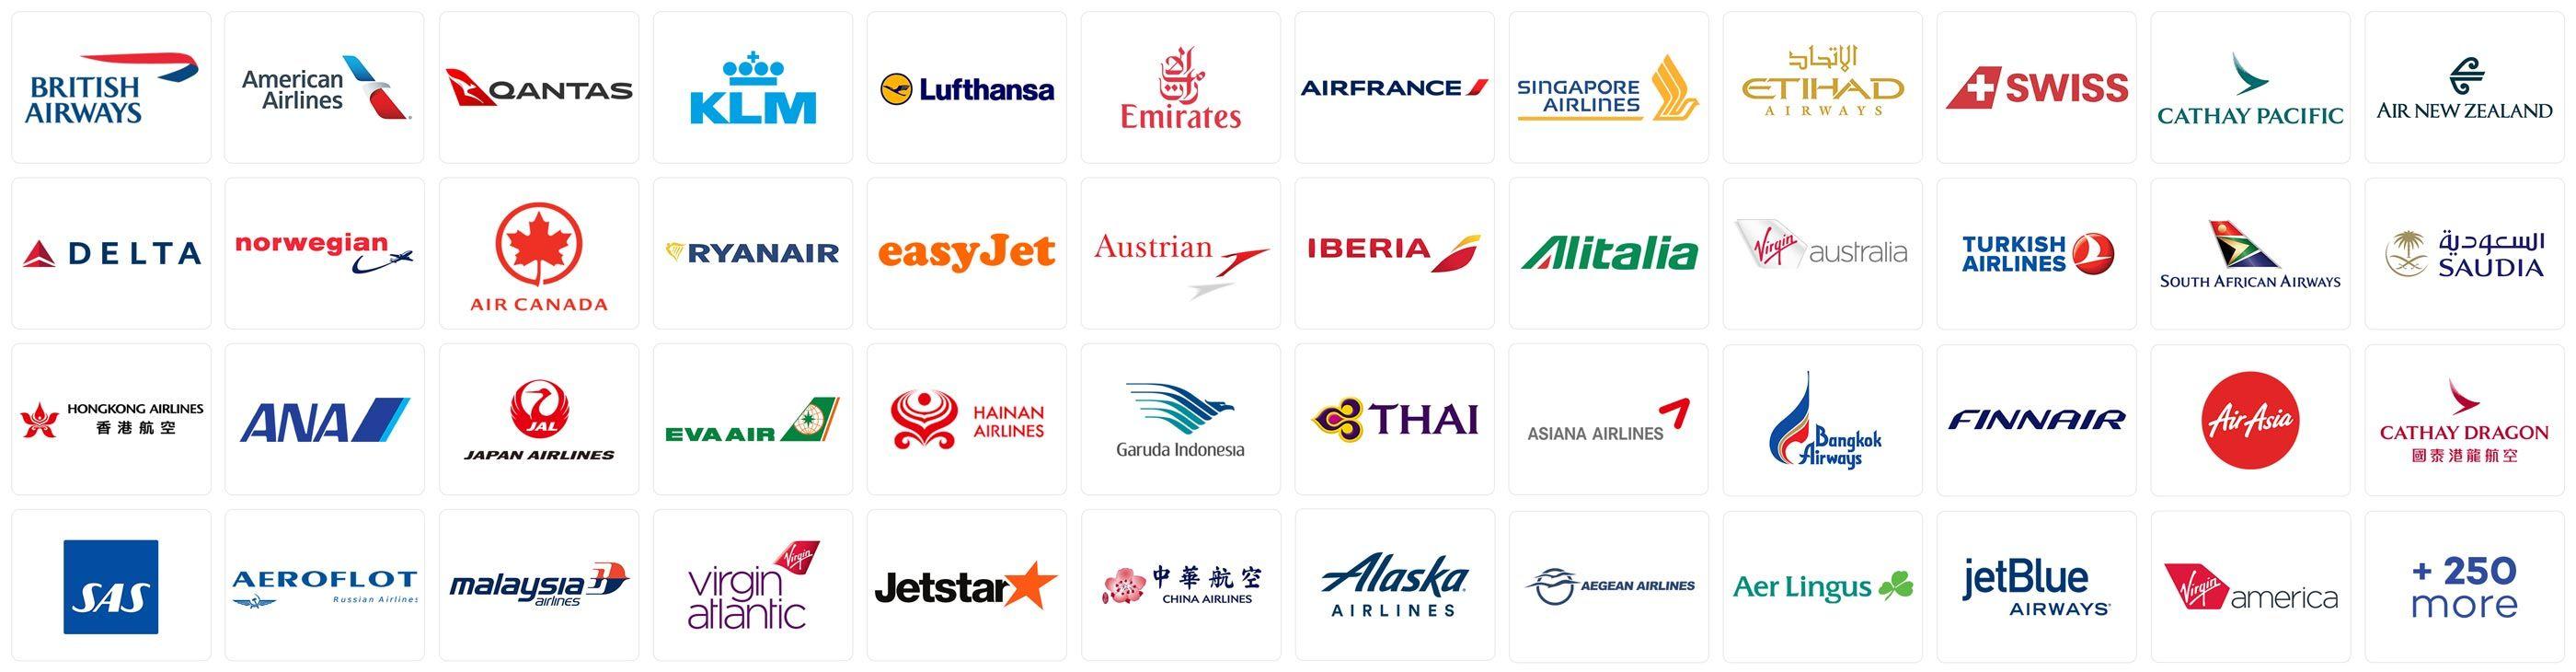 Asia Airlines Logo - The #1 flight gift card for over 300 airlines worldwide | Flightgiftcard